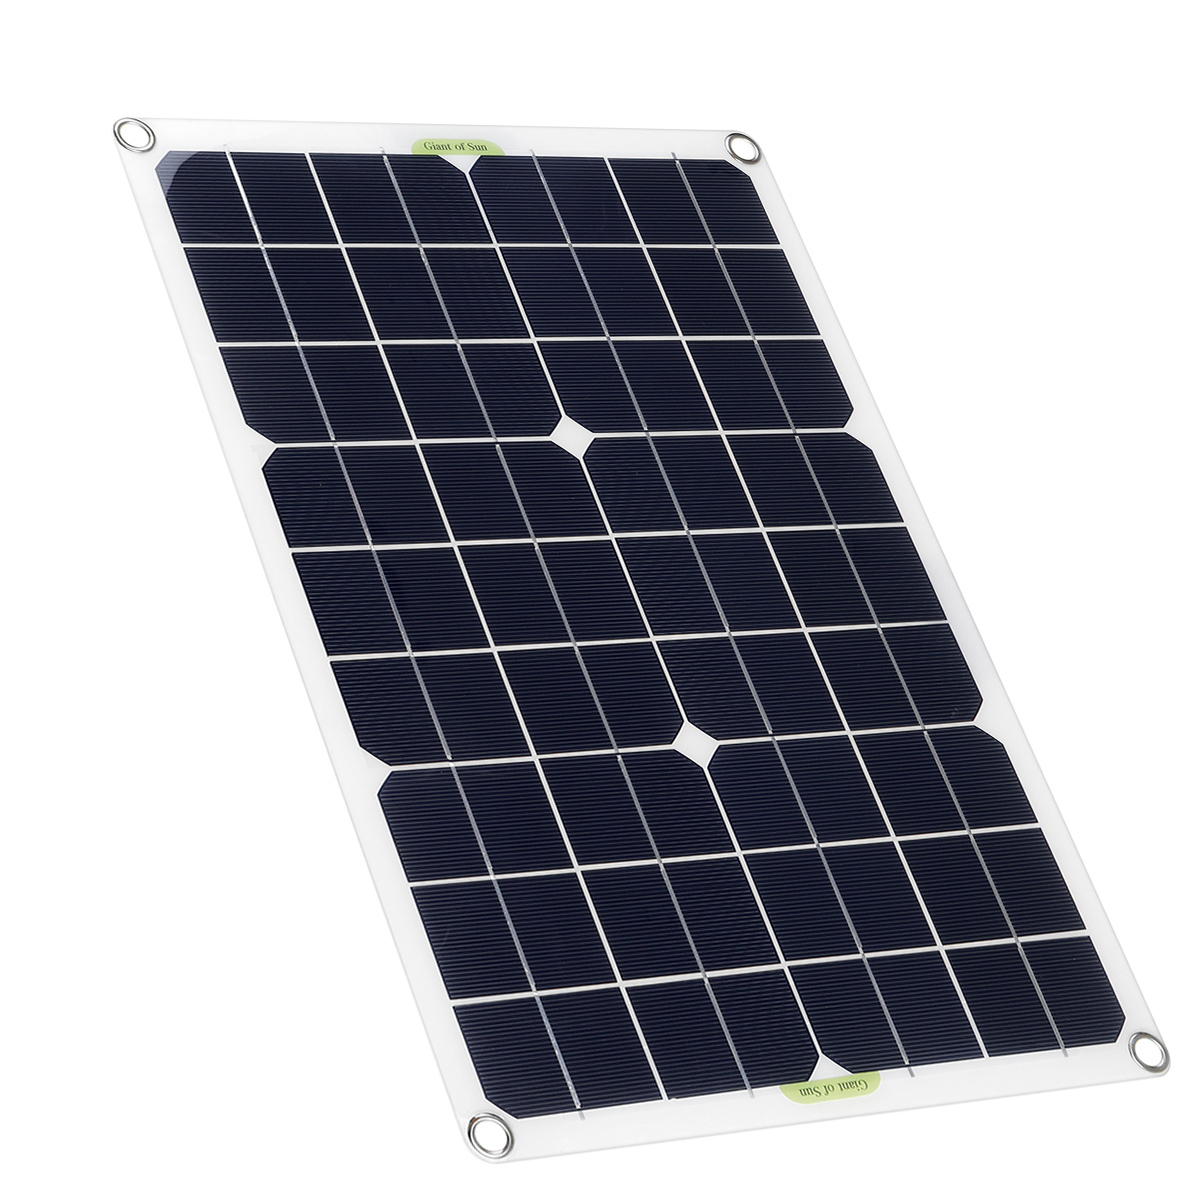 50W-Solar-Panel-Kit-18V-Battery-Charger-1020304050A-Controller-DCUSBTYPE-C-For-Outdoor-Camping-Acces-1780843-10